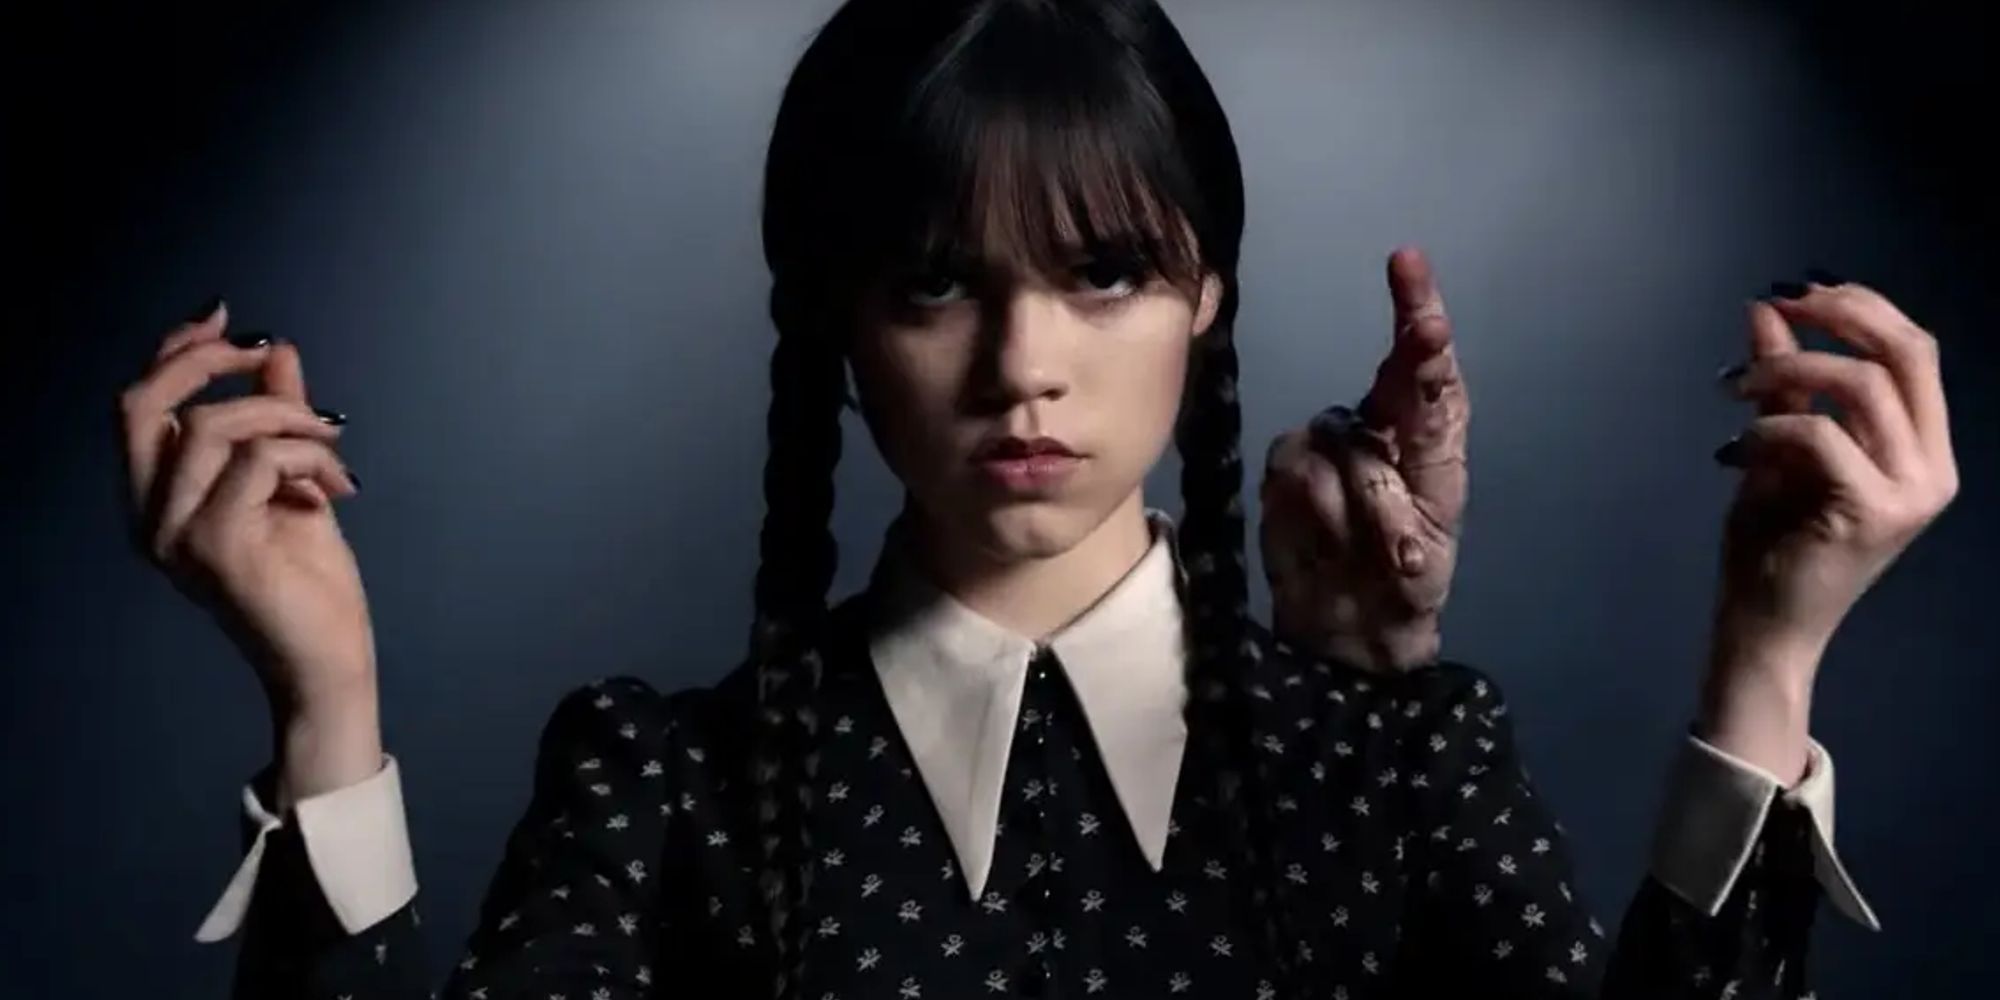 Wednesday Jenna Ortega snapping to classic theme song with Thing